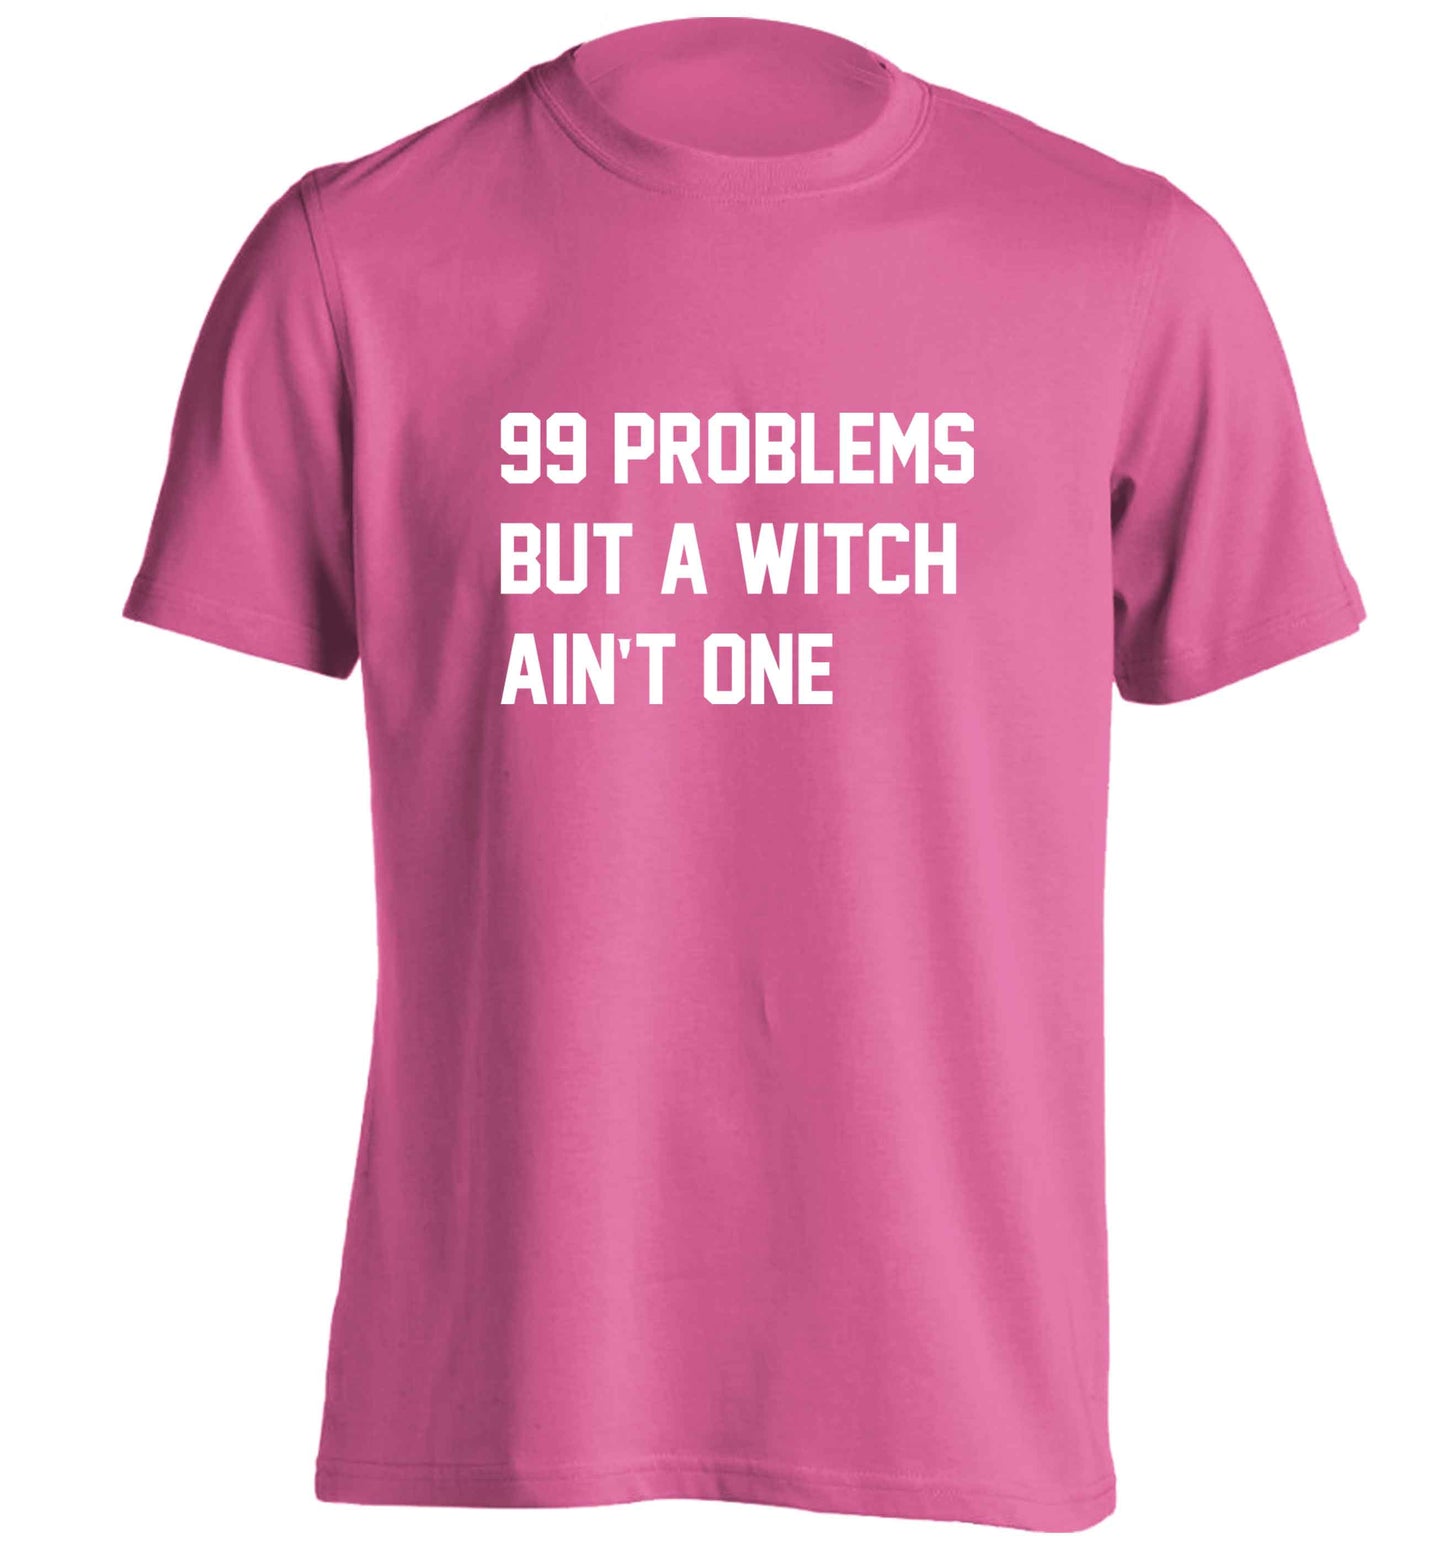 99 Problems but a witch aint one adults unisex pink Tshirt 2XL